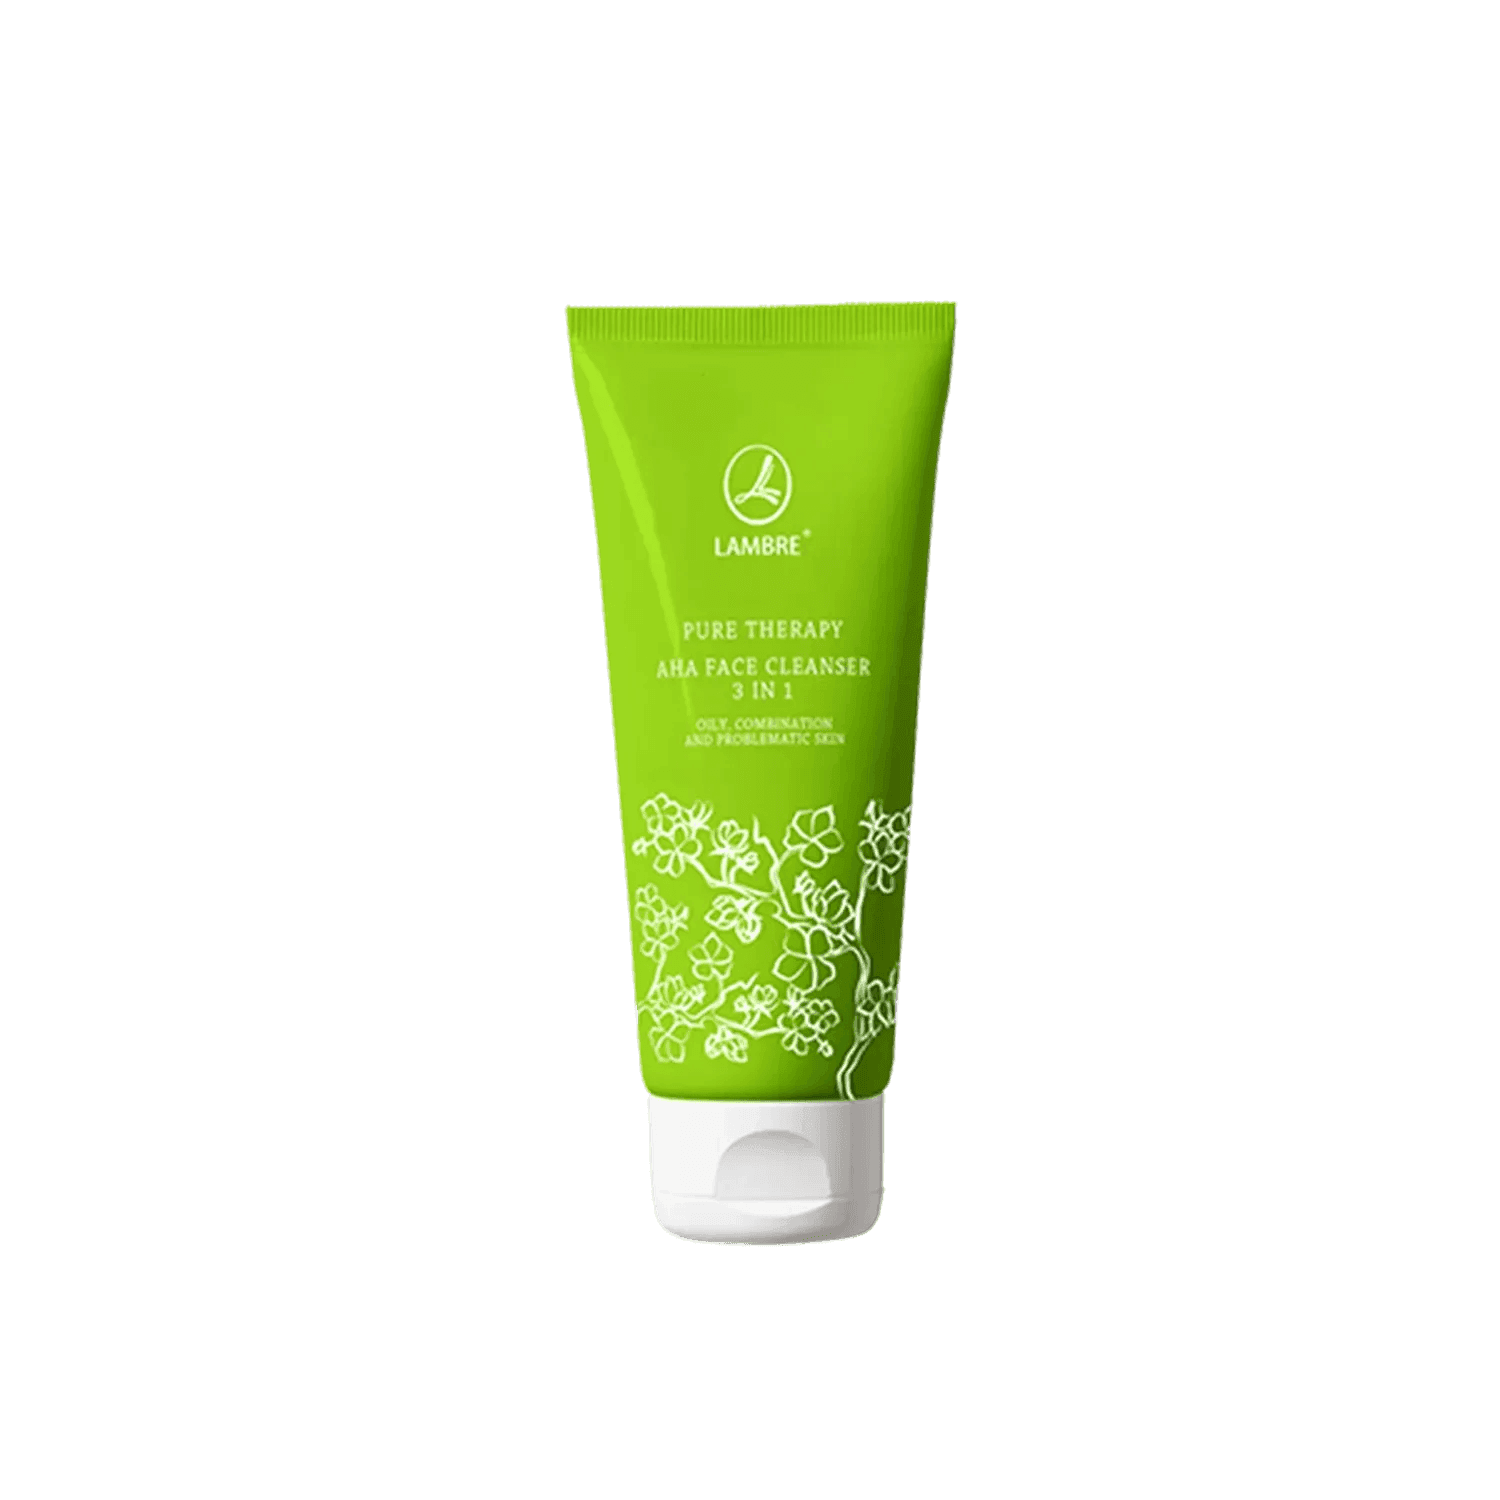 LAMBRE Pure Therapy 3 In 1 AHA Face Cleanser (80ml)